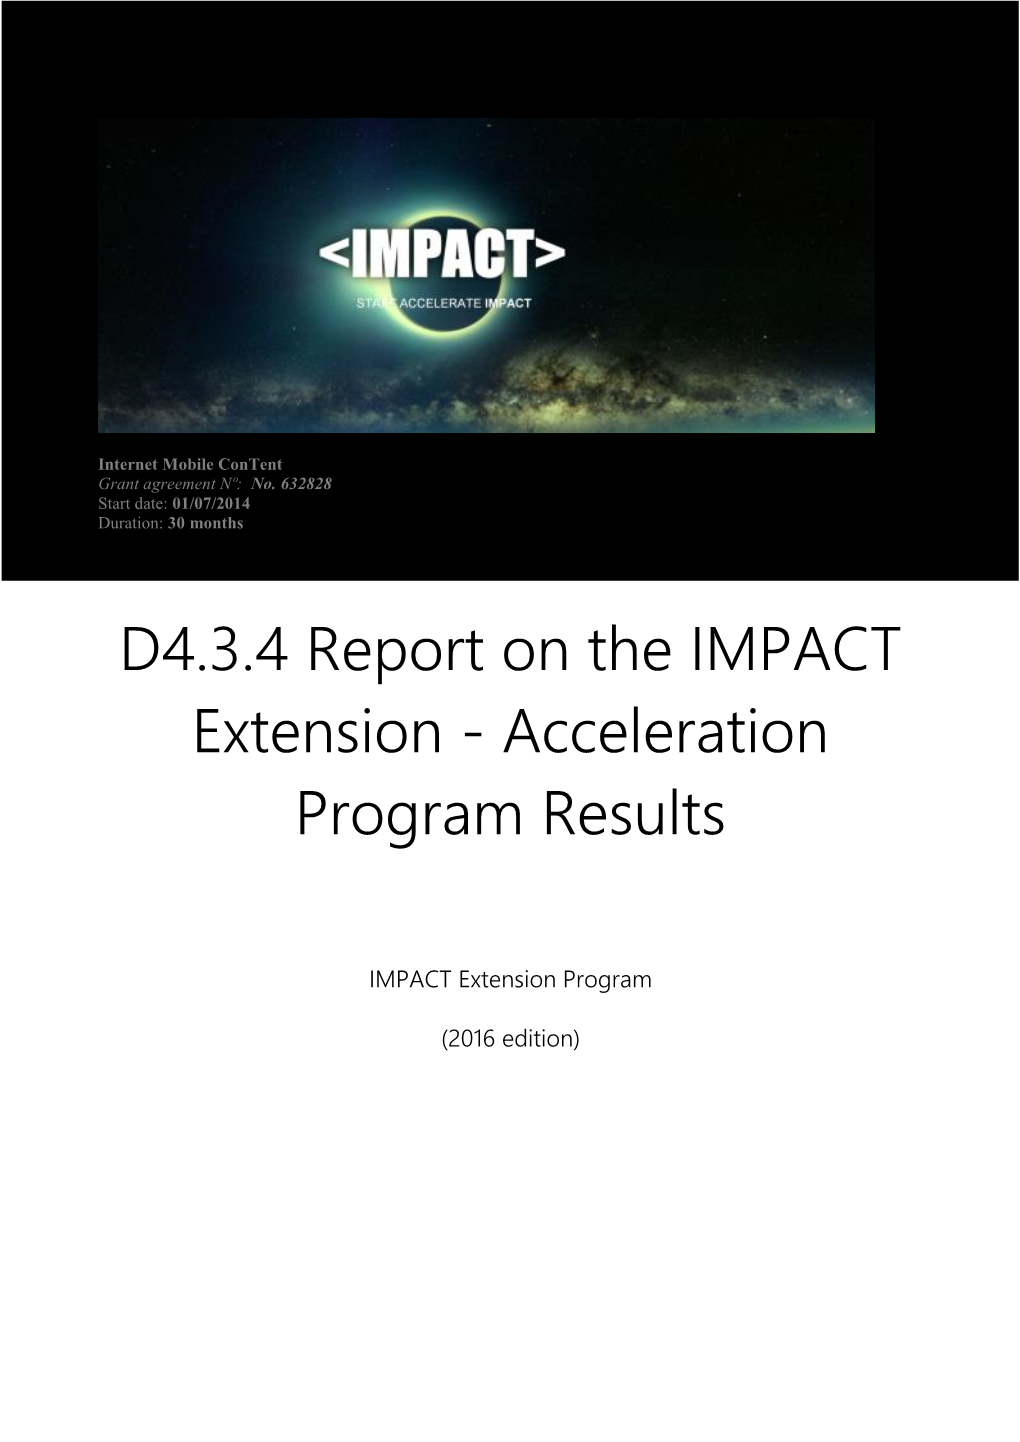 D4.3.4 Report on the IMPACT Extension - Acceleration Program Results